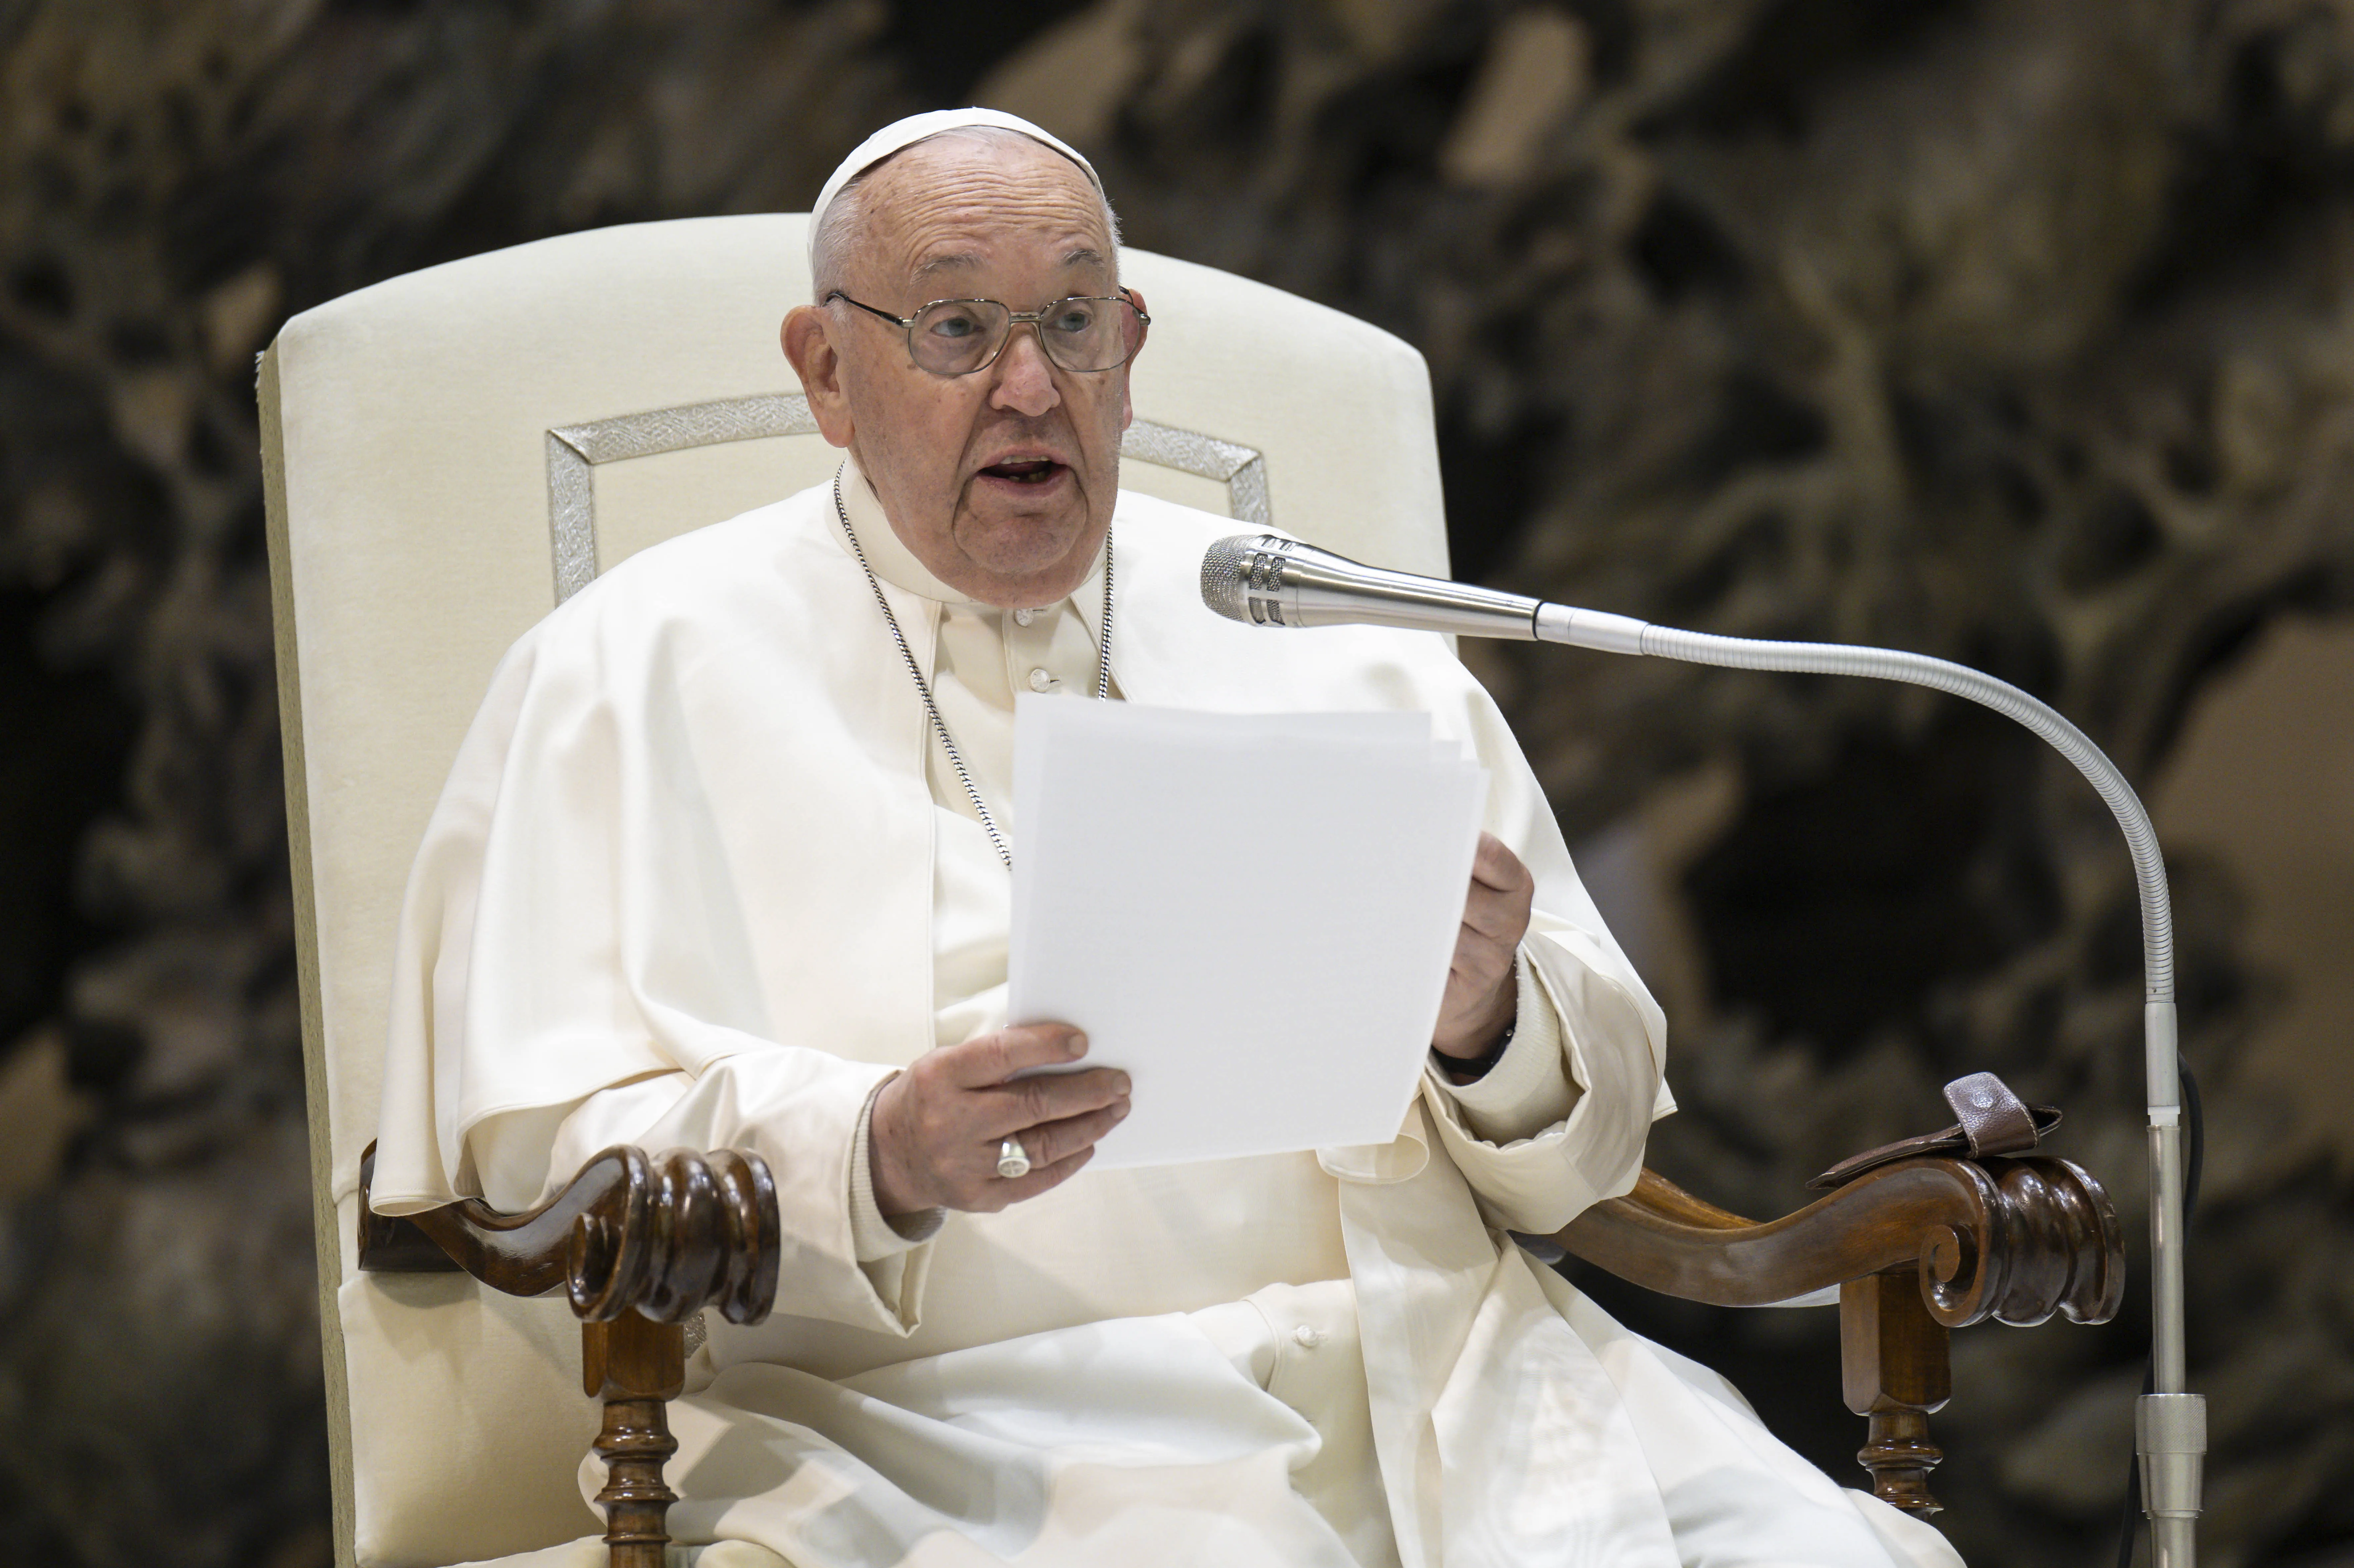 Pope Francis: We need to ‘welcome God into our daily lives’ and pray for ‘real peace’